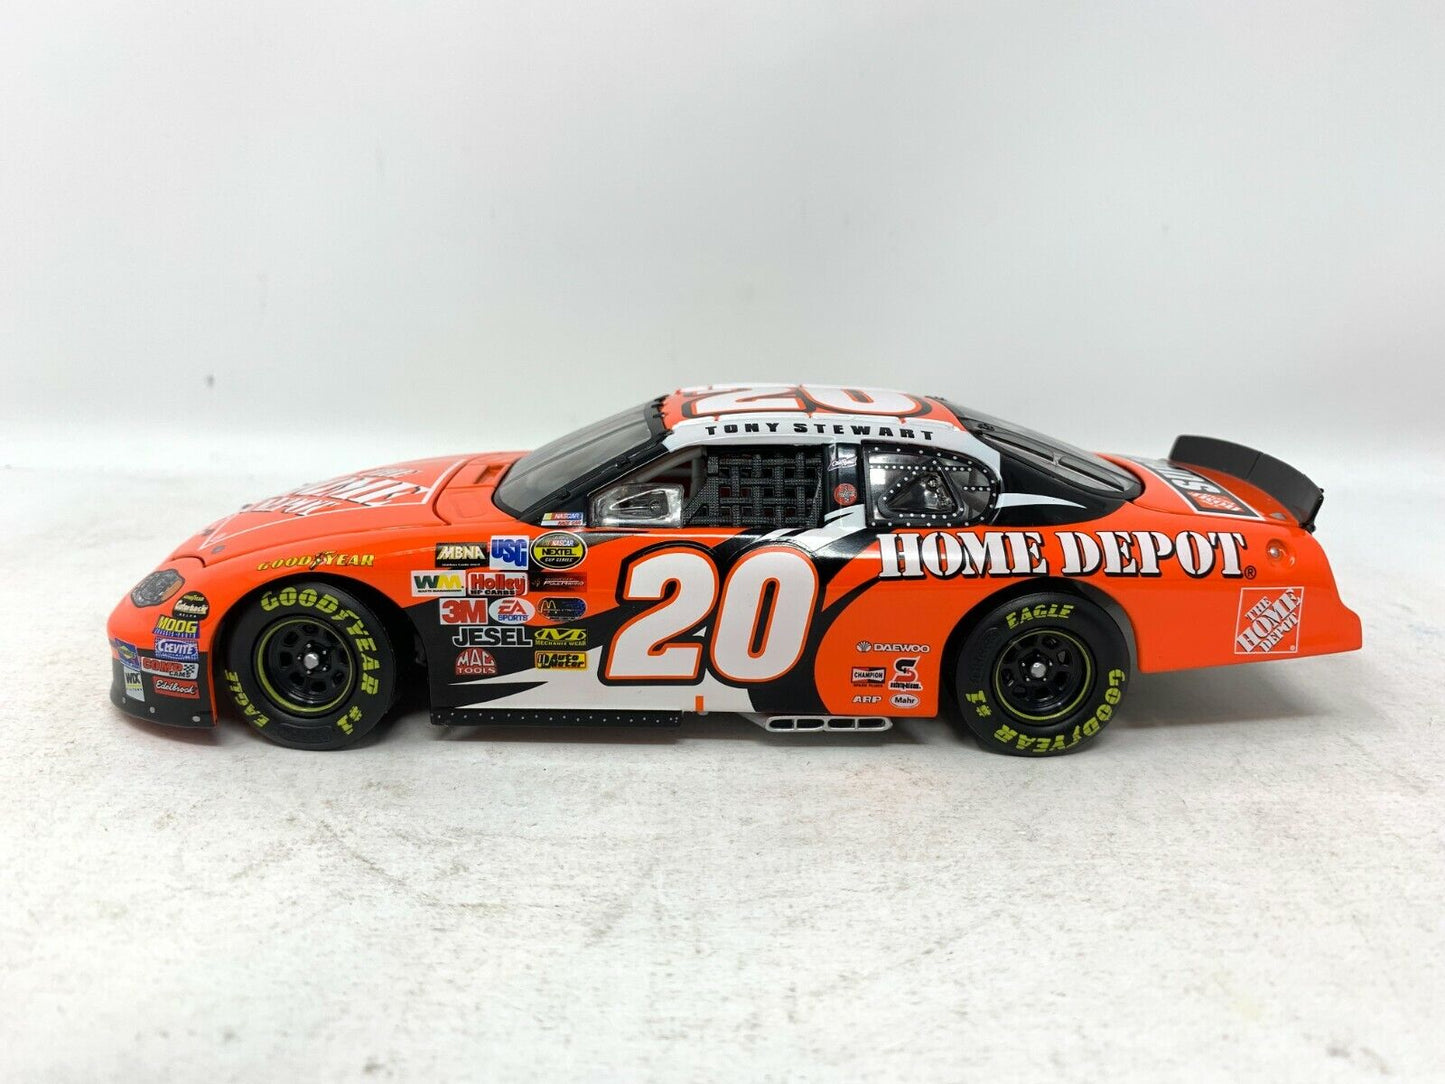 Action Nascar #20 Tony Stewart Home Depot Happy Father's Day 1:24 Diecast